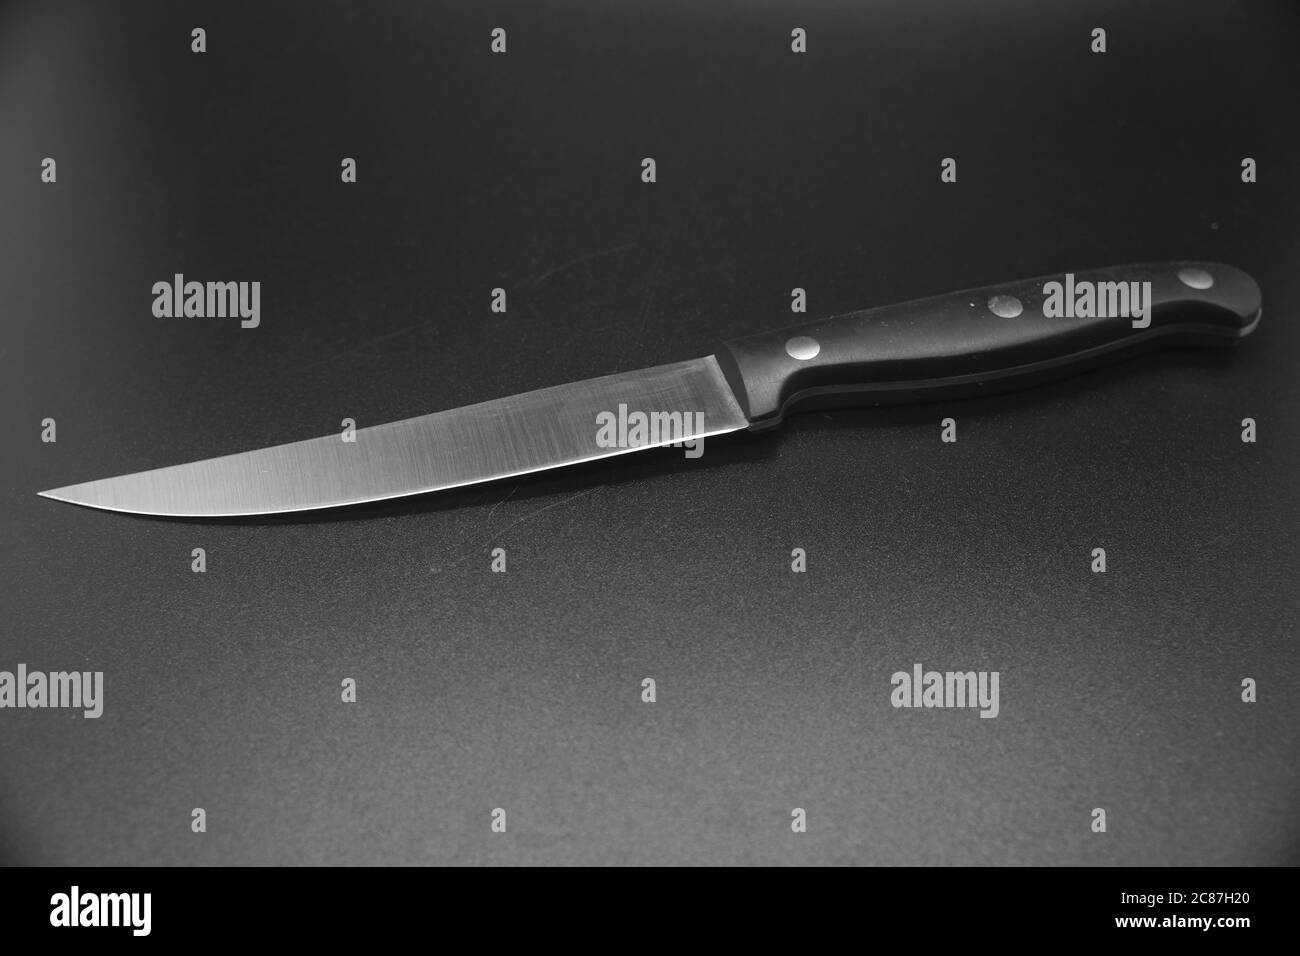 https://c8.alamy.com/comp/2C87H20/isolated-silver-steak-knife-with-black-handle-on-black-background-2C87H20.jpg